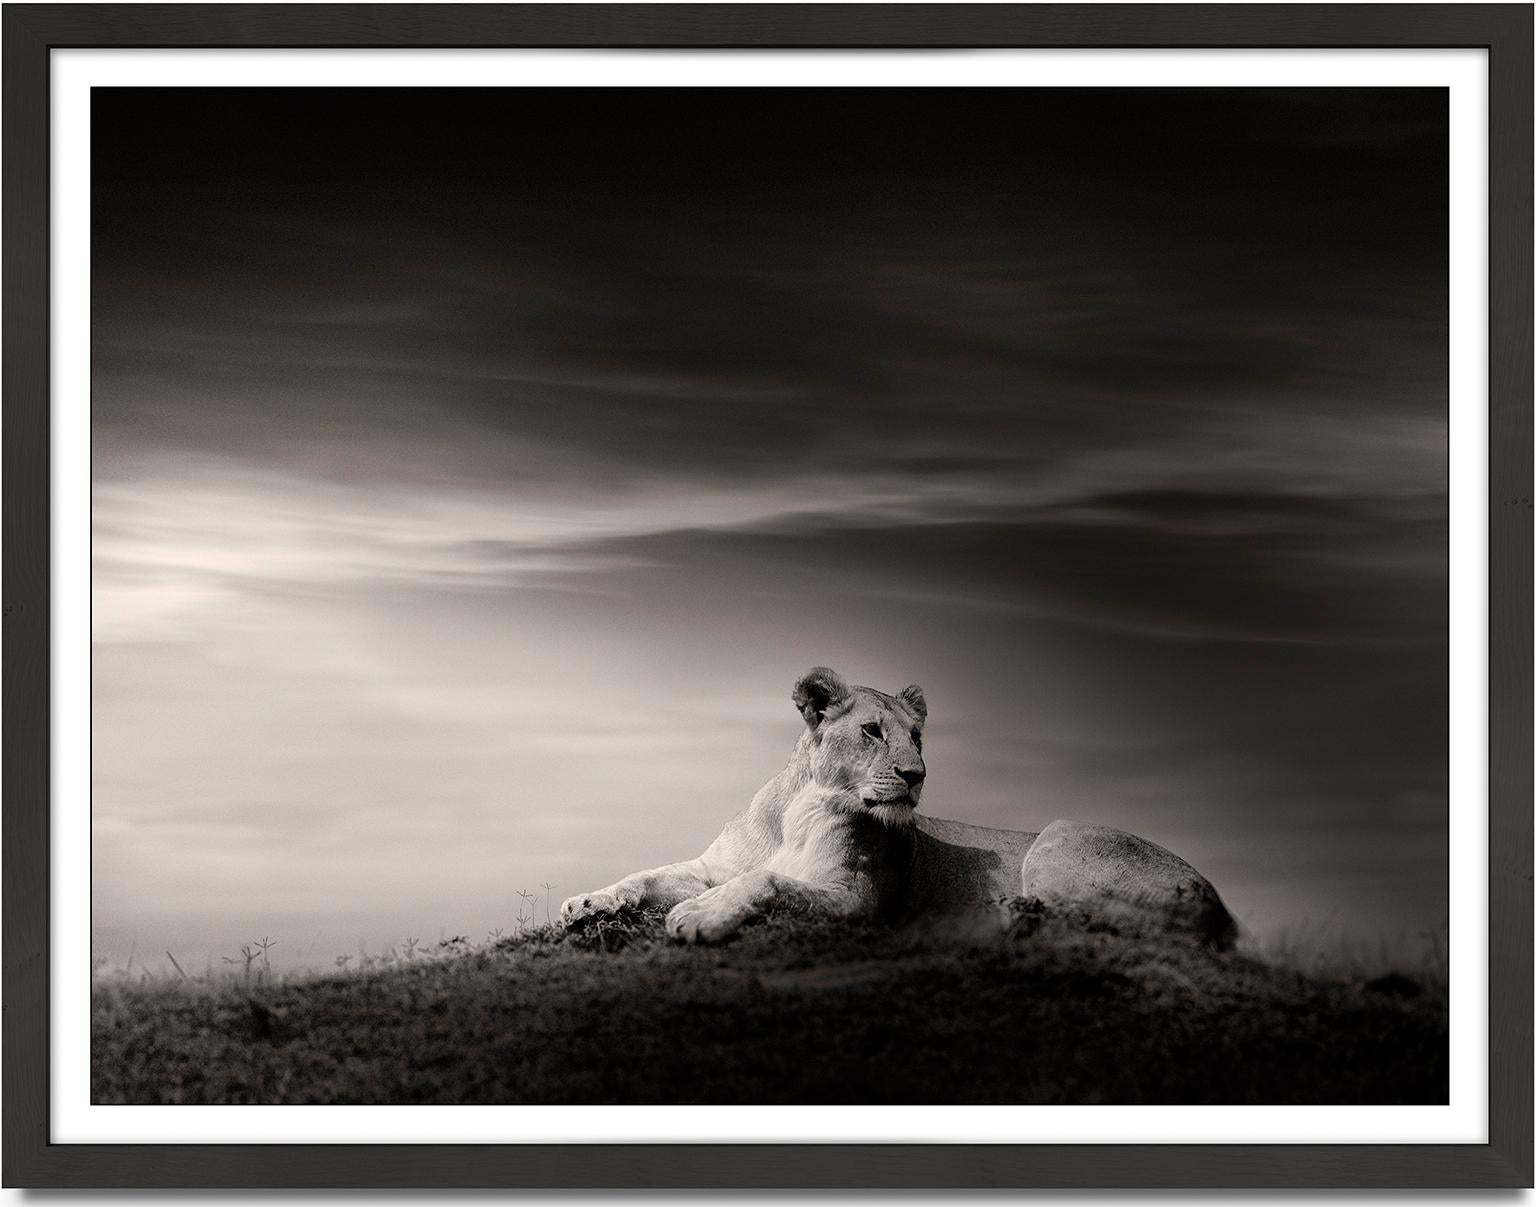 The Lioness, Lion, black and white photography, Africa, Portrait, Wildlife - Photograph by Joachim Schmeisser